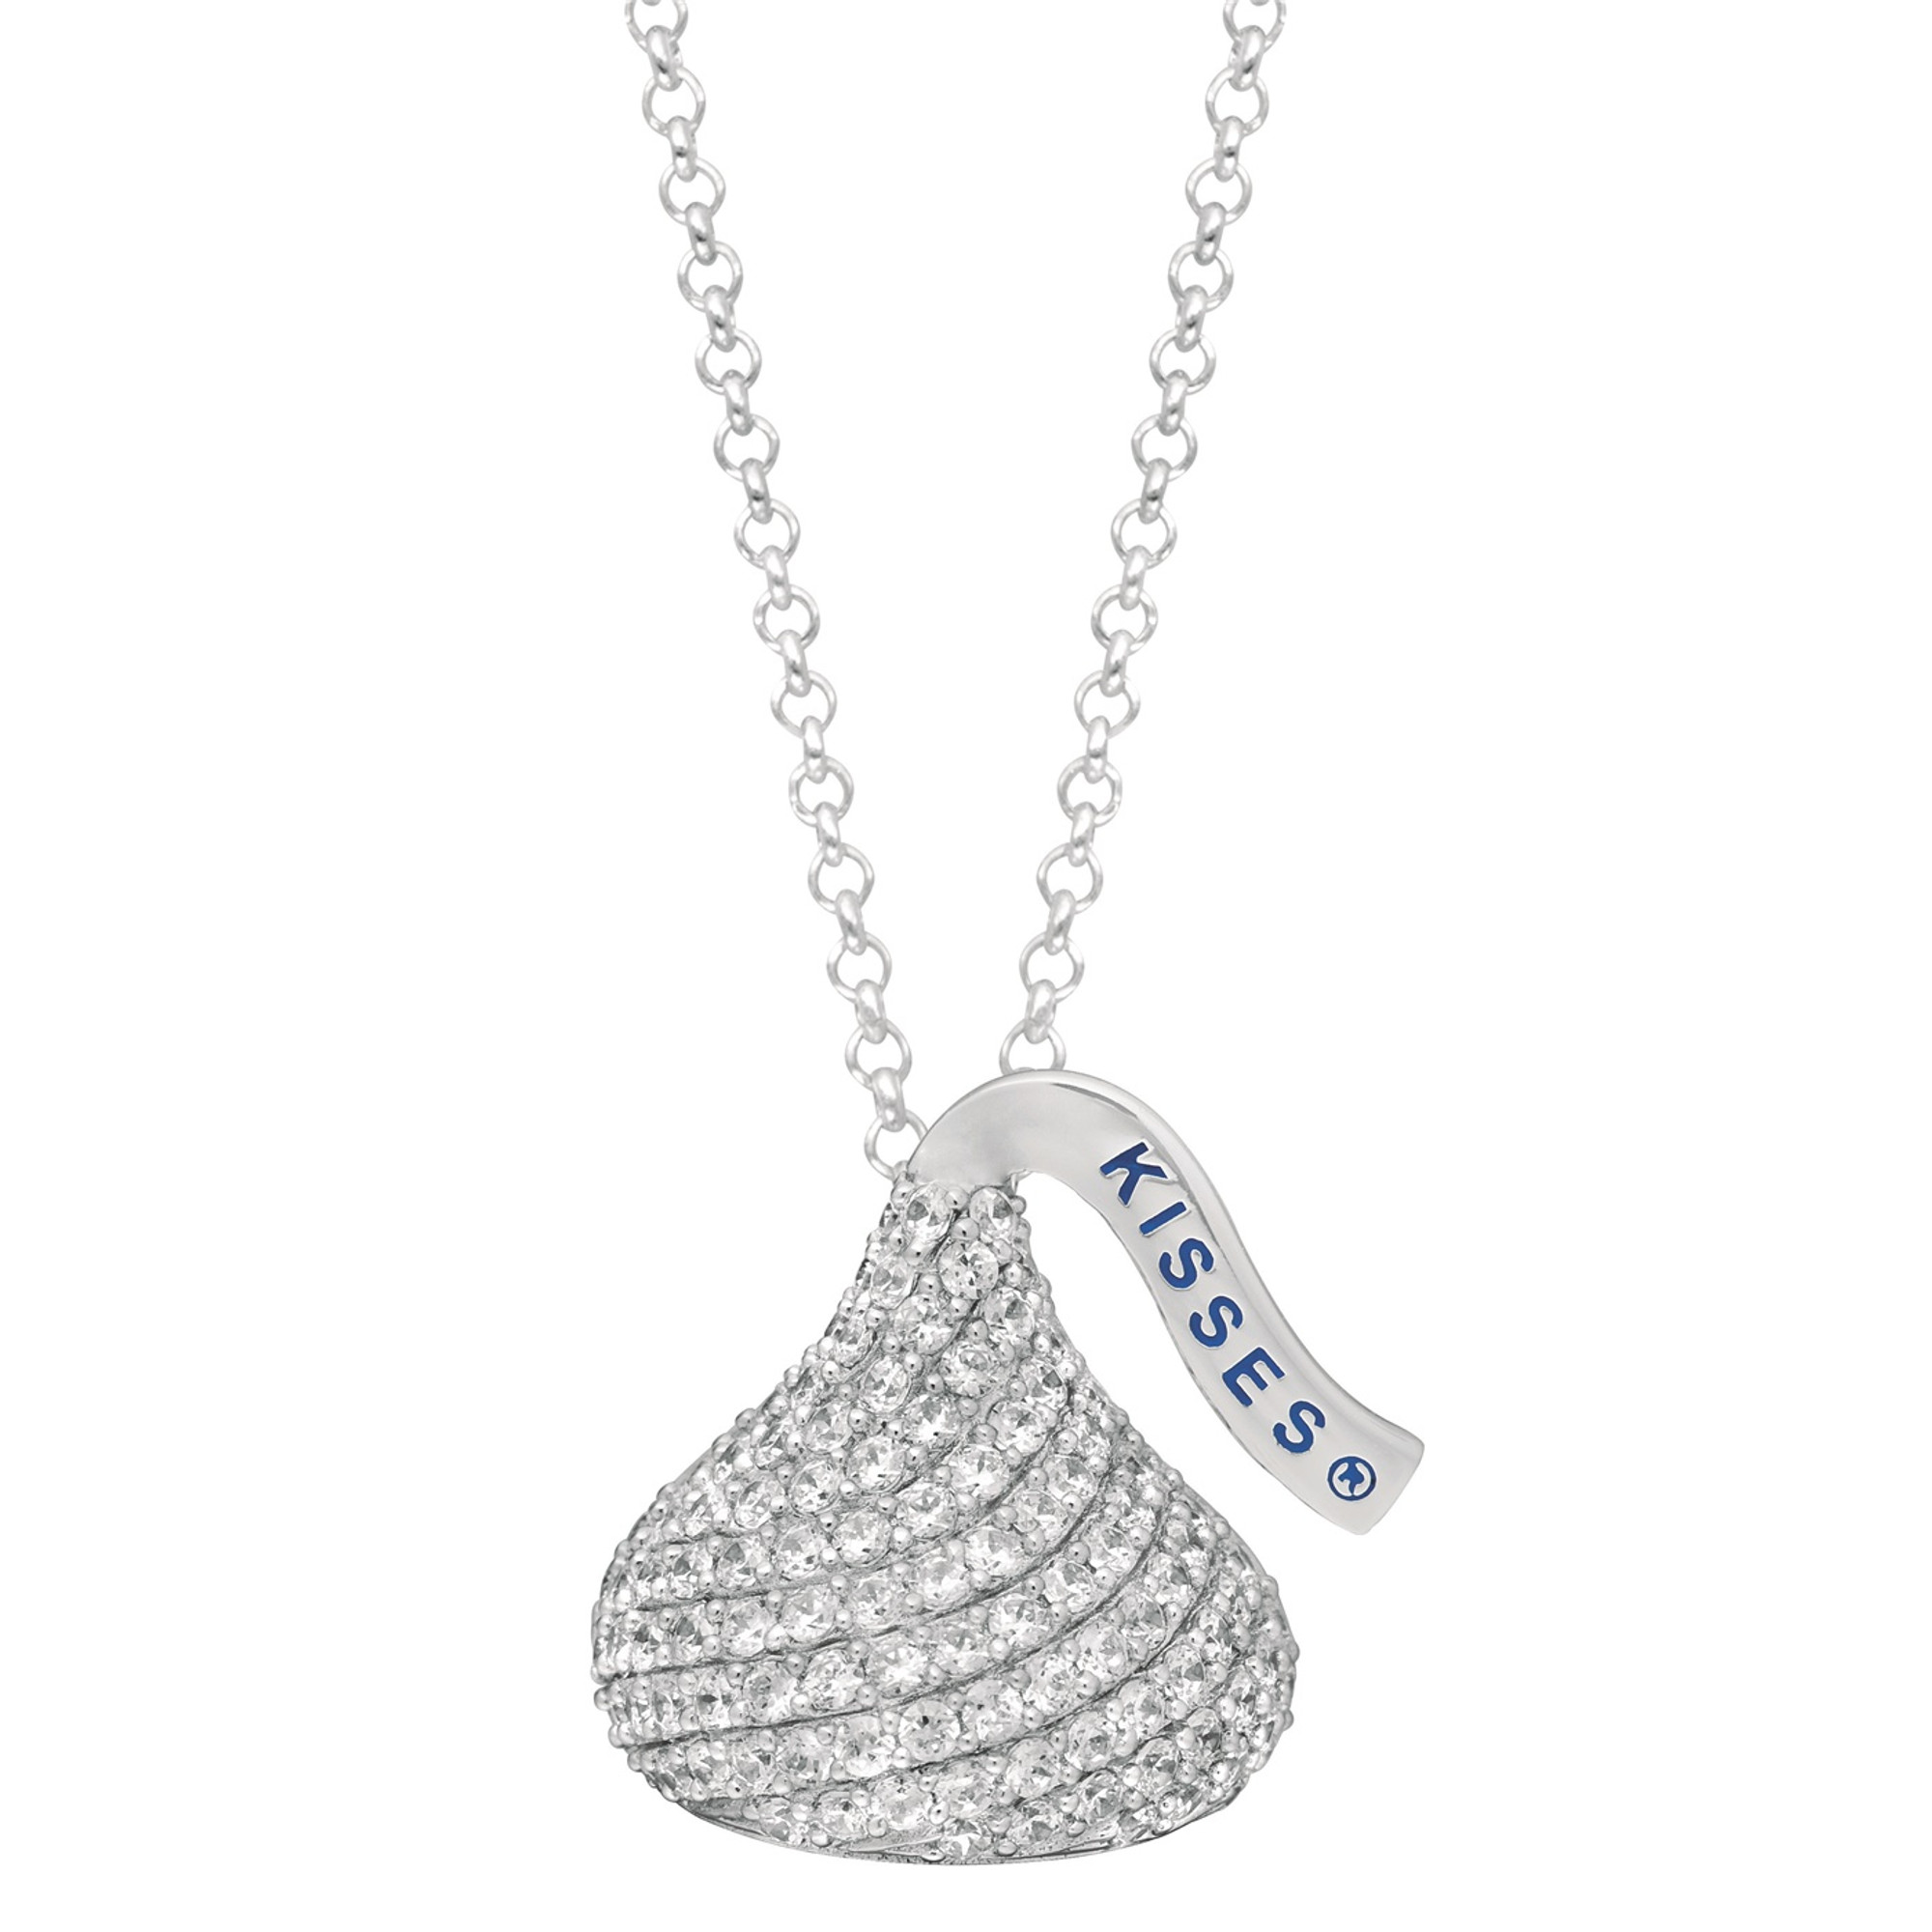 Hershey's Kiss Sterling Silver Pendant with White CZs